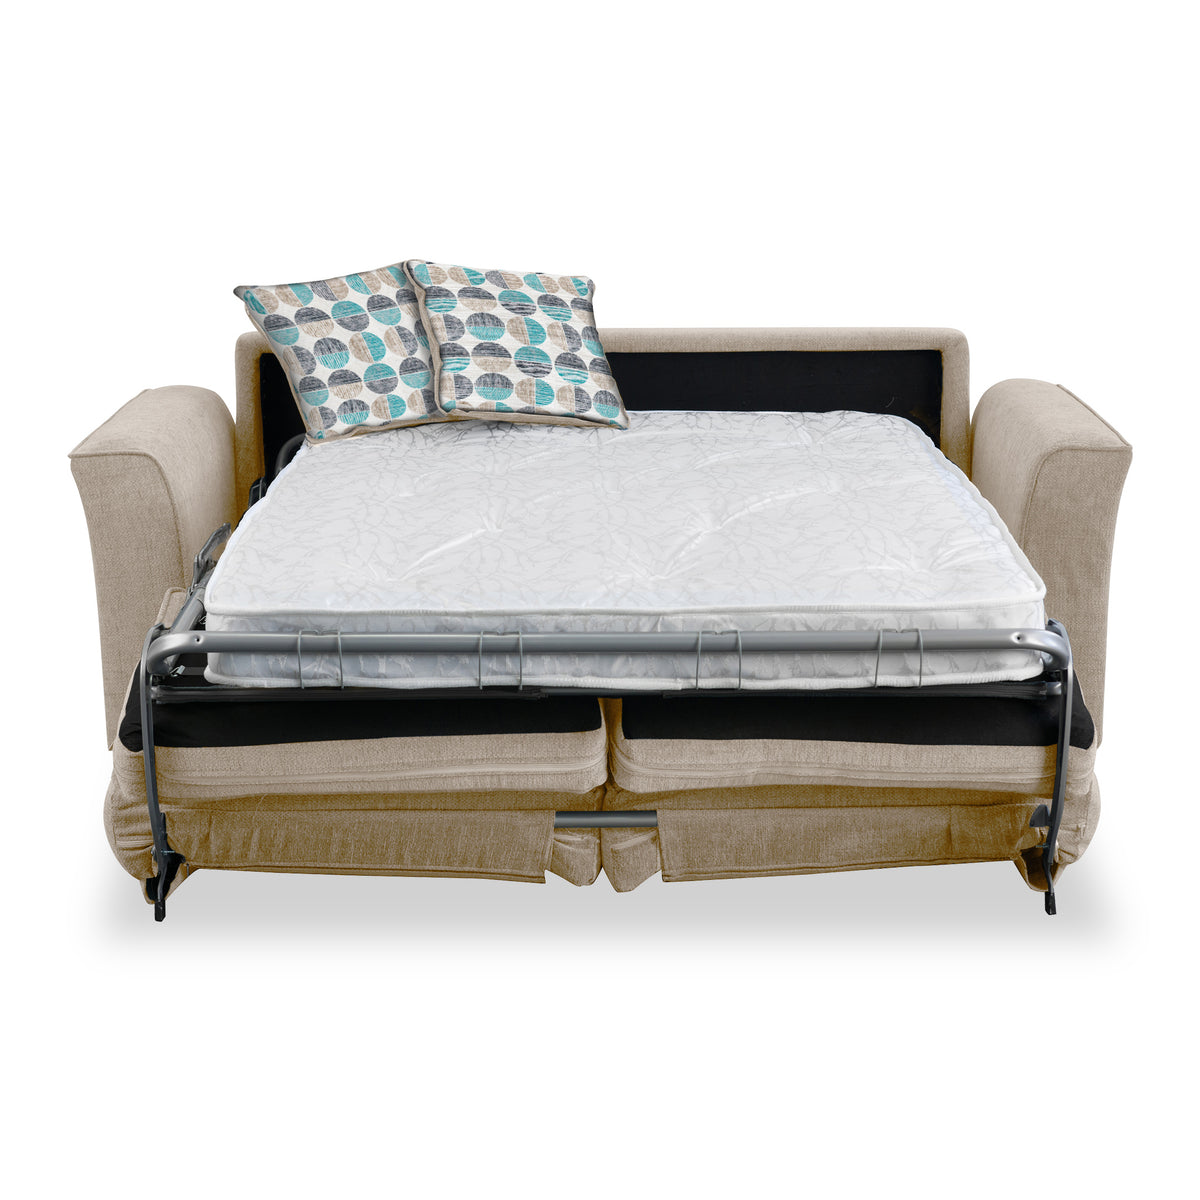 Boston 2 Seater Sofabed in Fawn with Rufus Duck Egg Cushions by Roseland Furniture